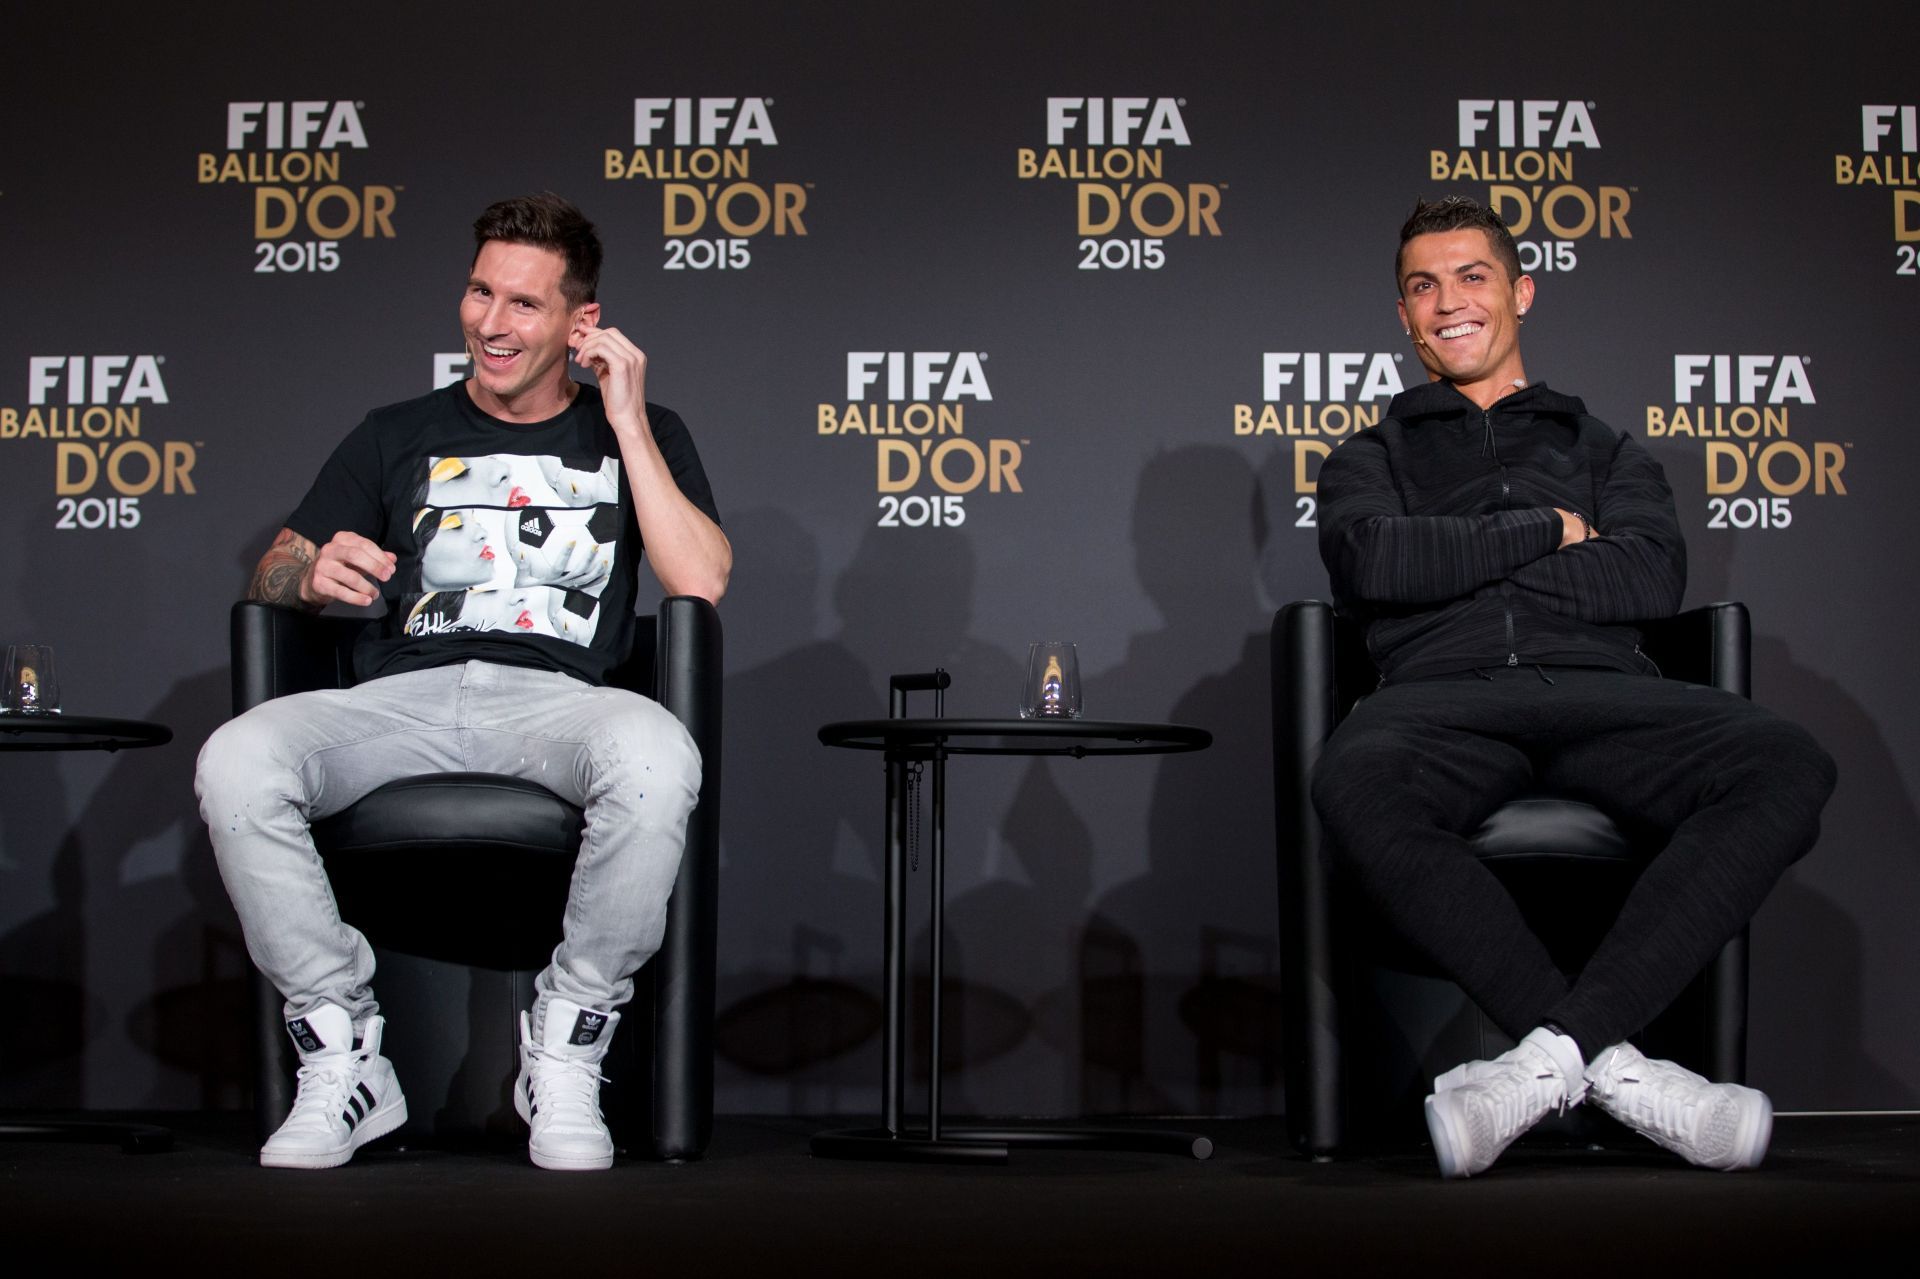 Lionel Messi and Cristiano Ronaldo regularly jostled for accolades.